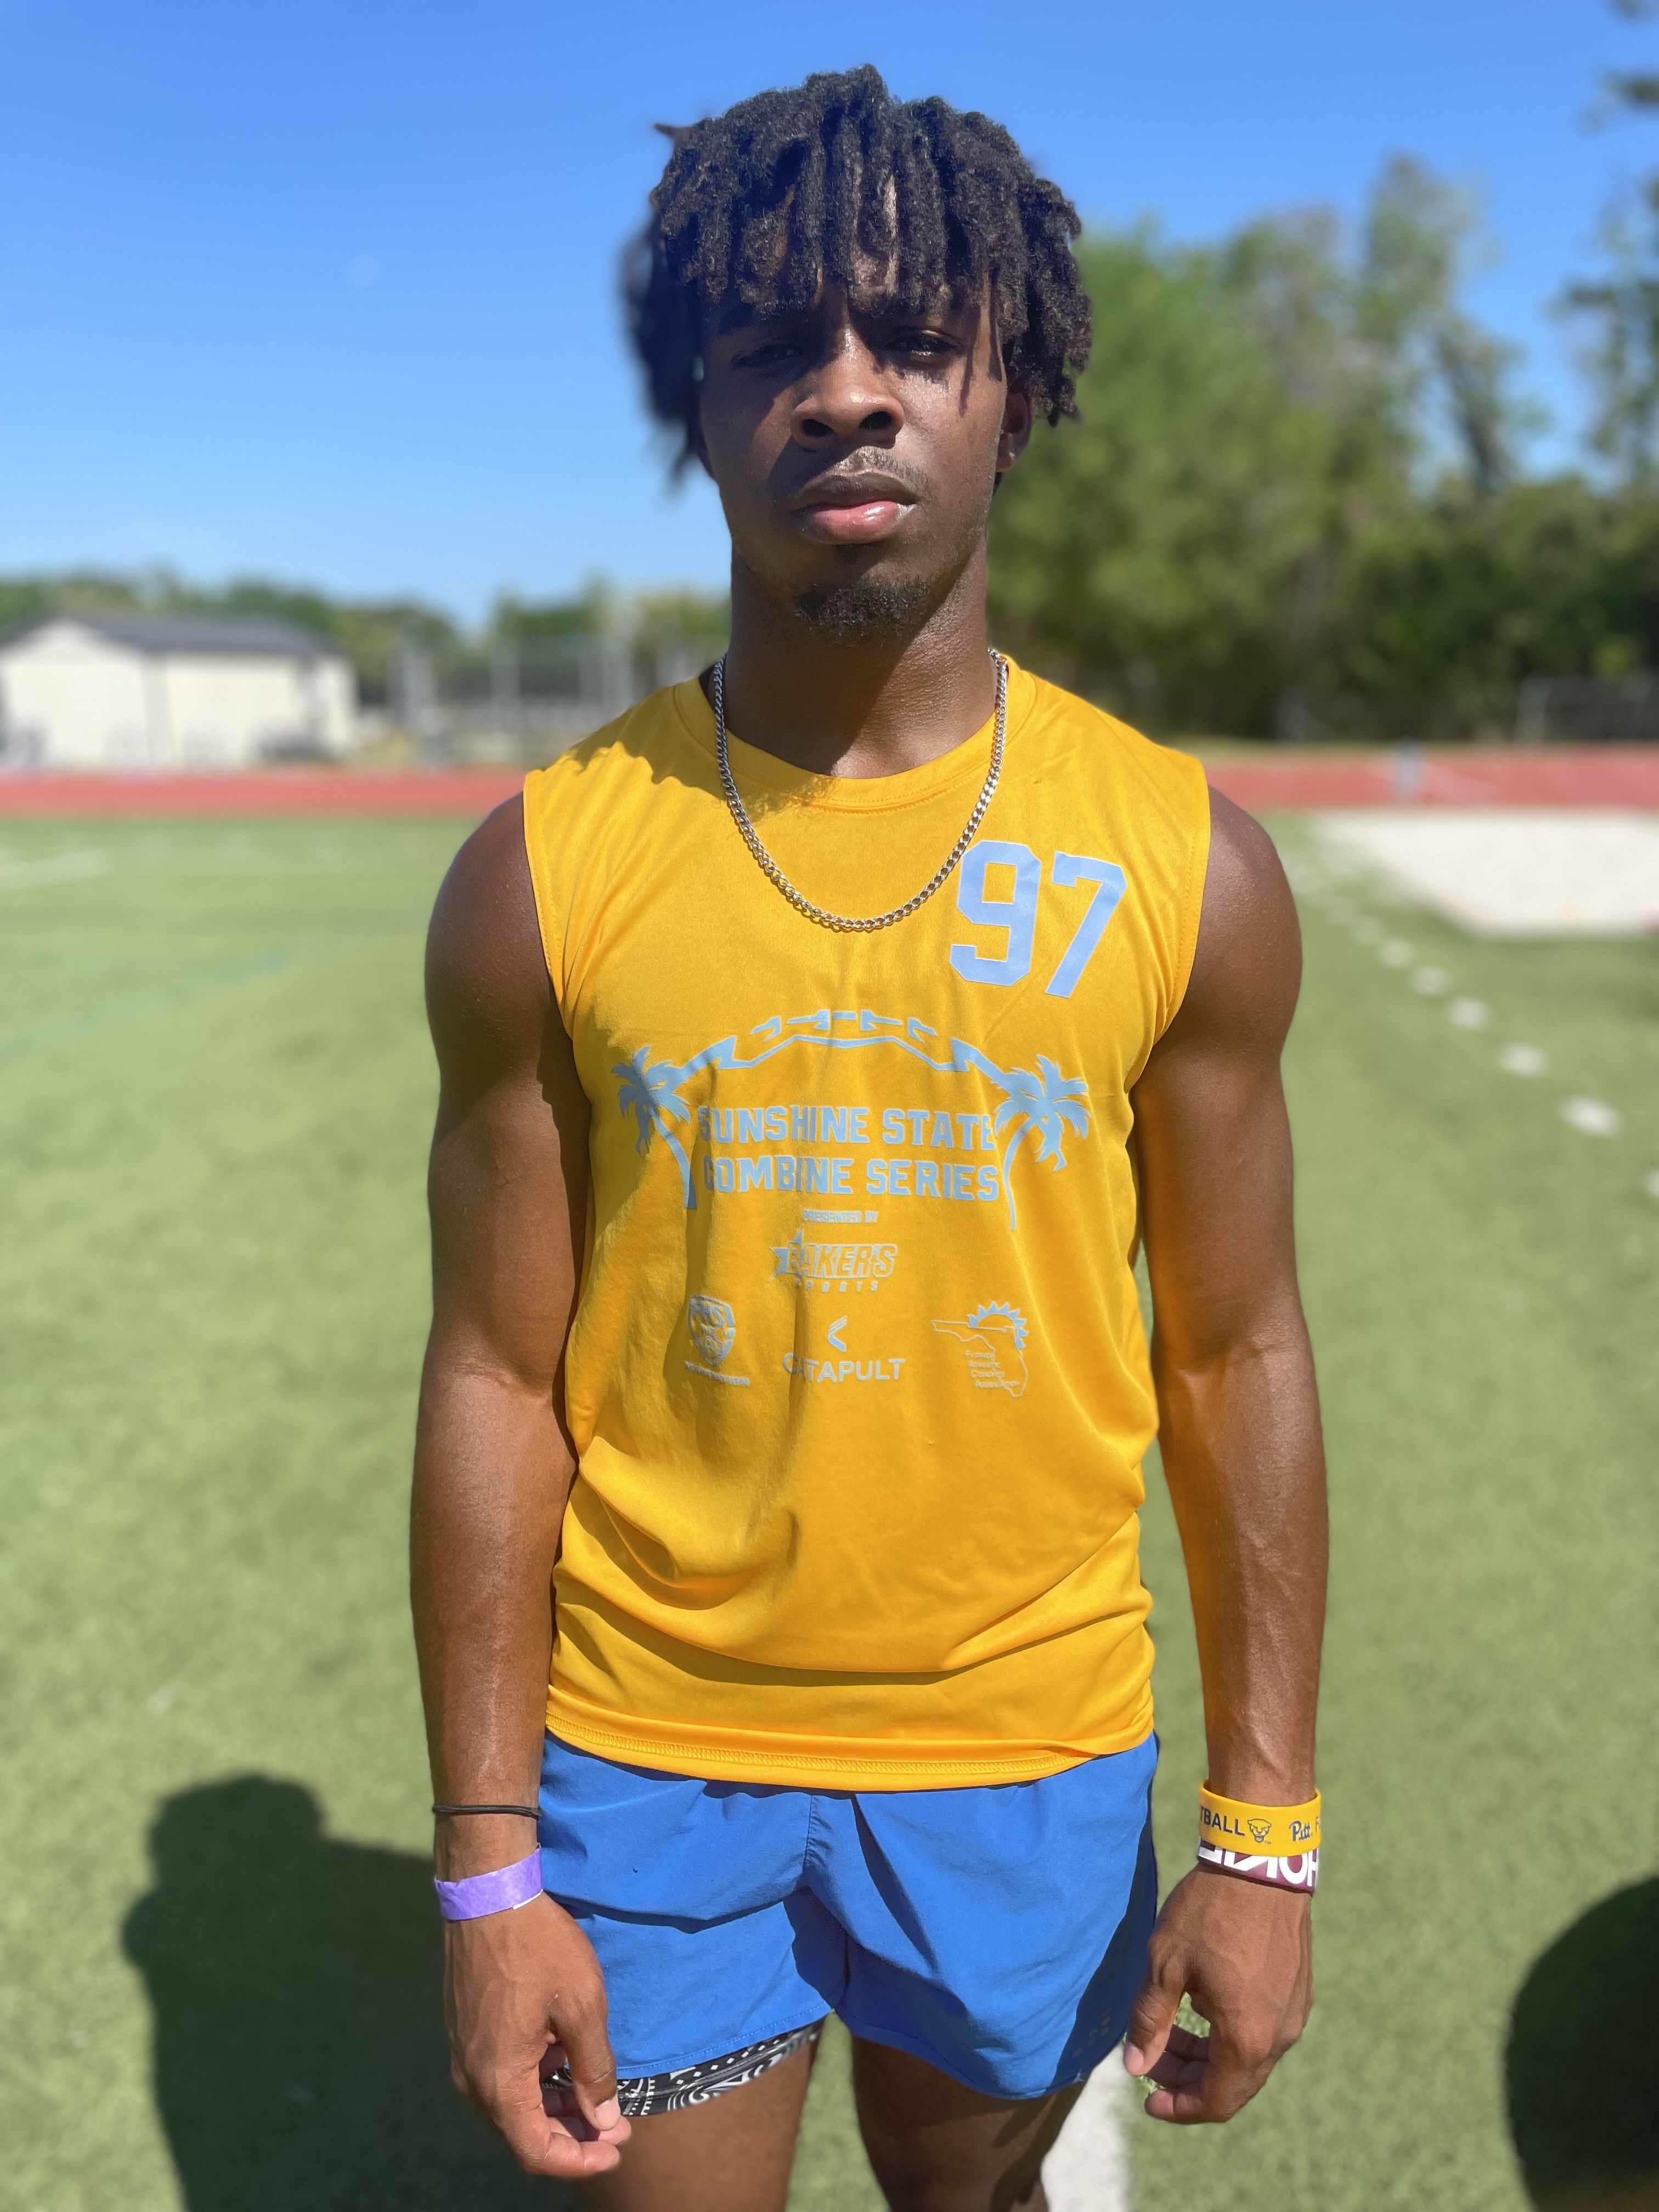 <span class="pn-tooltip pn-player-link">
        <span class="name-pointer">Sunshine State Combine: Top Offensive Standouts</span>
        <span class="info-box not-prose" style="background: linear-gradient(to bottom, rgba(193,25,32, 0.95) 0%,rgba(193,25,32, 1) 100%)">
            <a href="https://prepredzone.com/2023/03/sunshine-state-combine-top-offensive-standouts/" class="link-wrap">
                                    <span class="player-img"><img src="https://prepredzone.com/wp-content/uploads/sites/3/2023/03/IMG-2220.jpg?w=150&h=150&crop=1" alt="Sunshine State Combine: Top Offensive Standouts"></span>
                
                <span class="player-details">
                    <span class="first-name">Sunshine</span>
                    <span class="last-name">State Combine: Top Offensive Standouts</span>
                    <span class="measurables">
                                            </span>
                                    </span>
                <span class="player-rank">
                                                        </span>
                                    <span class="state-abbr"></span>
                            </a>

            
        </span>
    </span>
